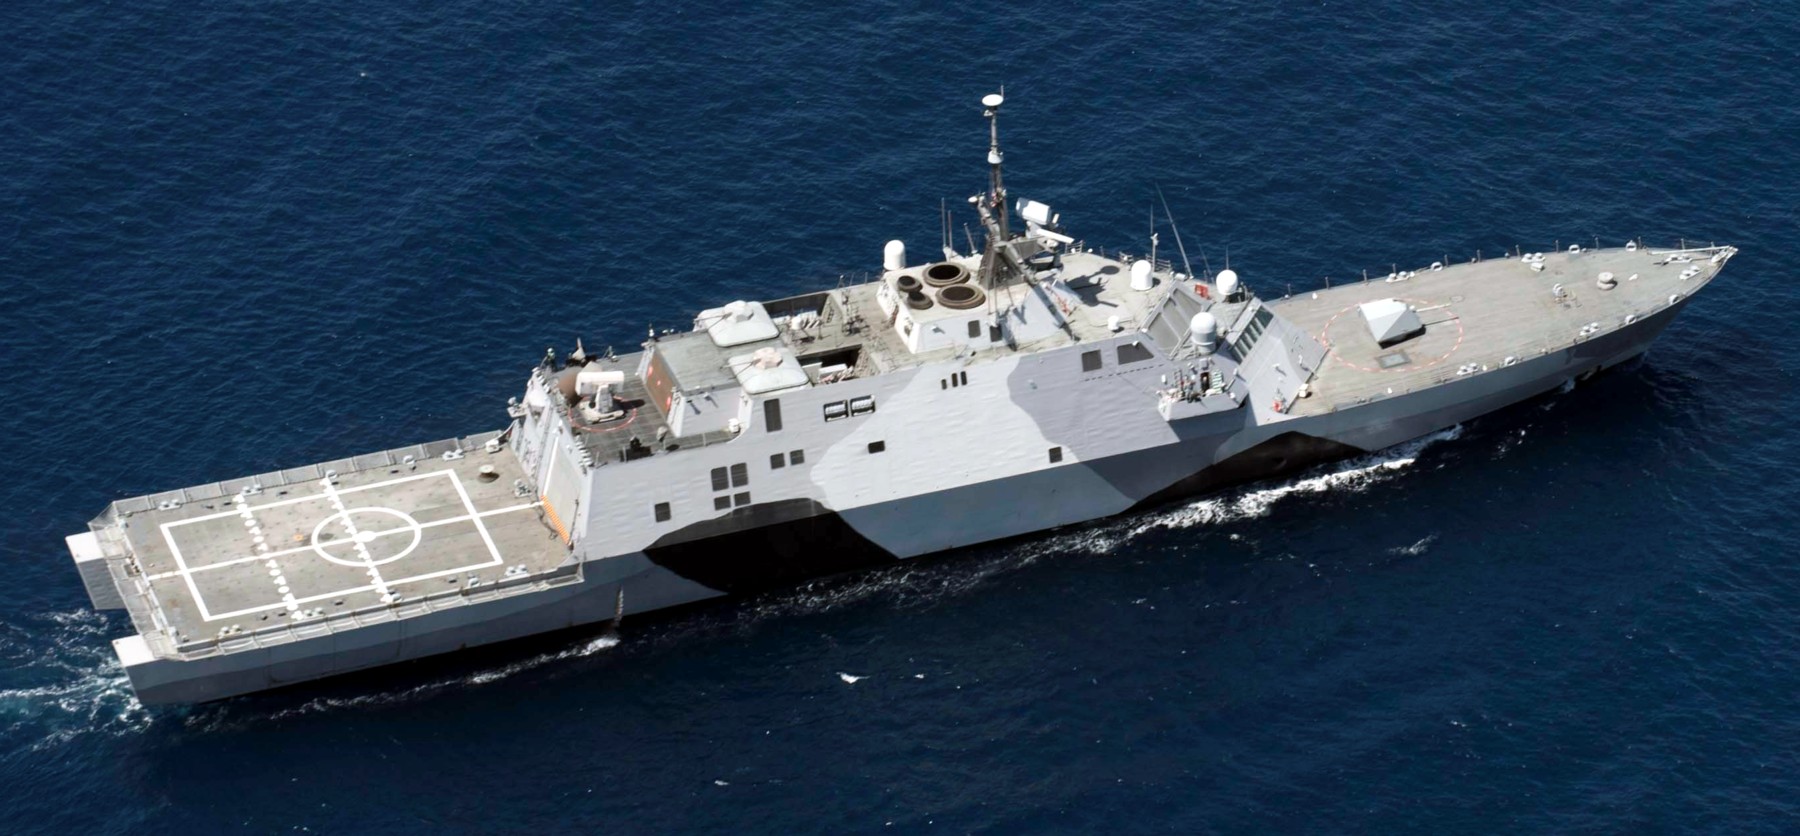 lcs-1 uss freedom class littoral combat ship us navy 09